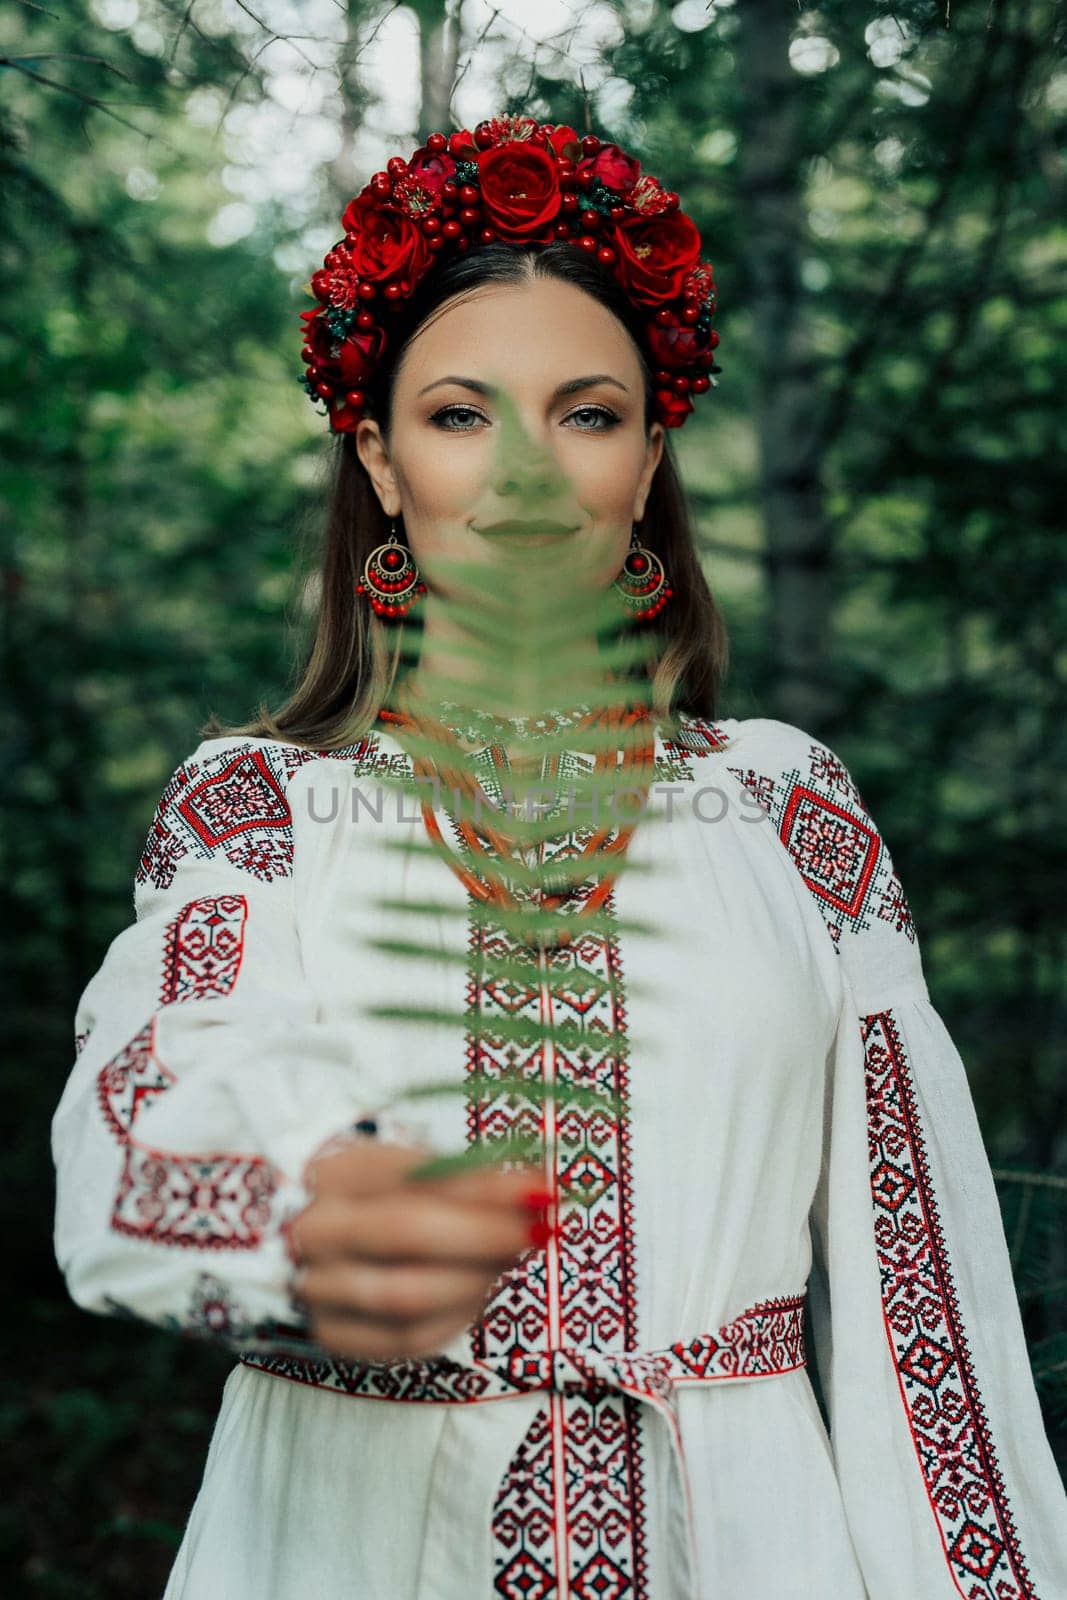 Portrait of ukrainian woman with fern in Carpathian mountains forest. She in in traditional ukrainian wreath, national dress - vyshyvanka, ancient coral beads.